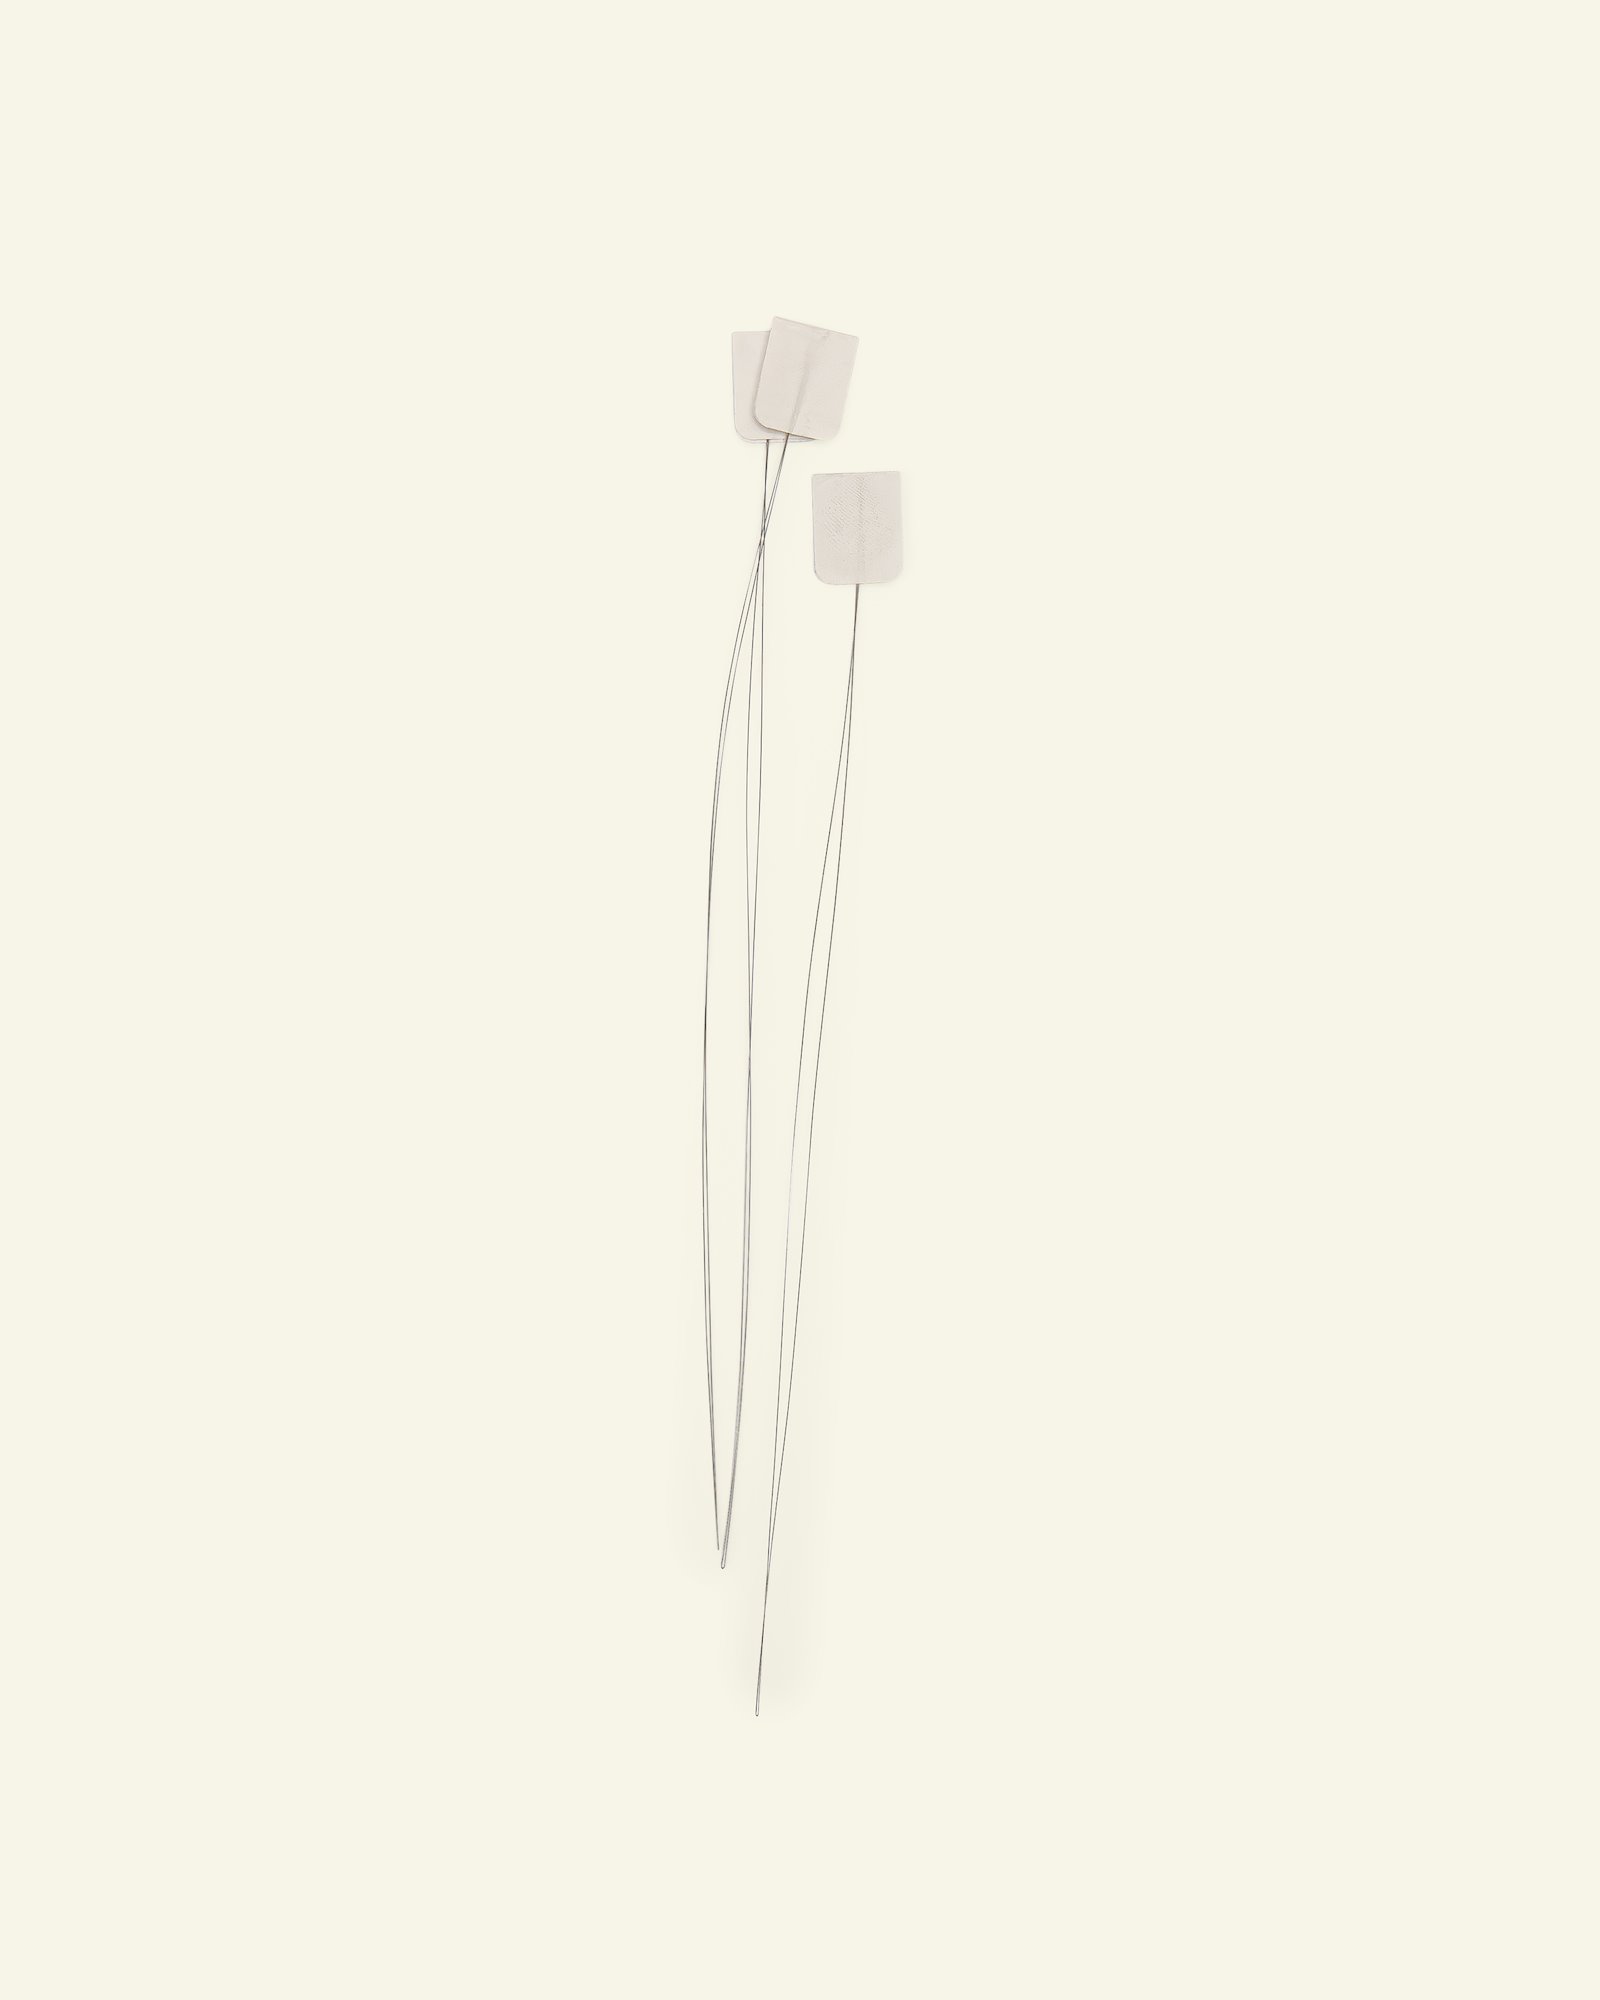 Needle threader for punch needle 22cm 3p